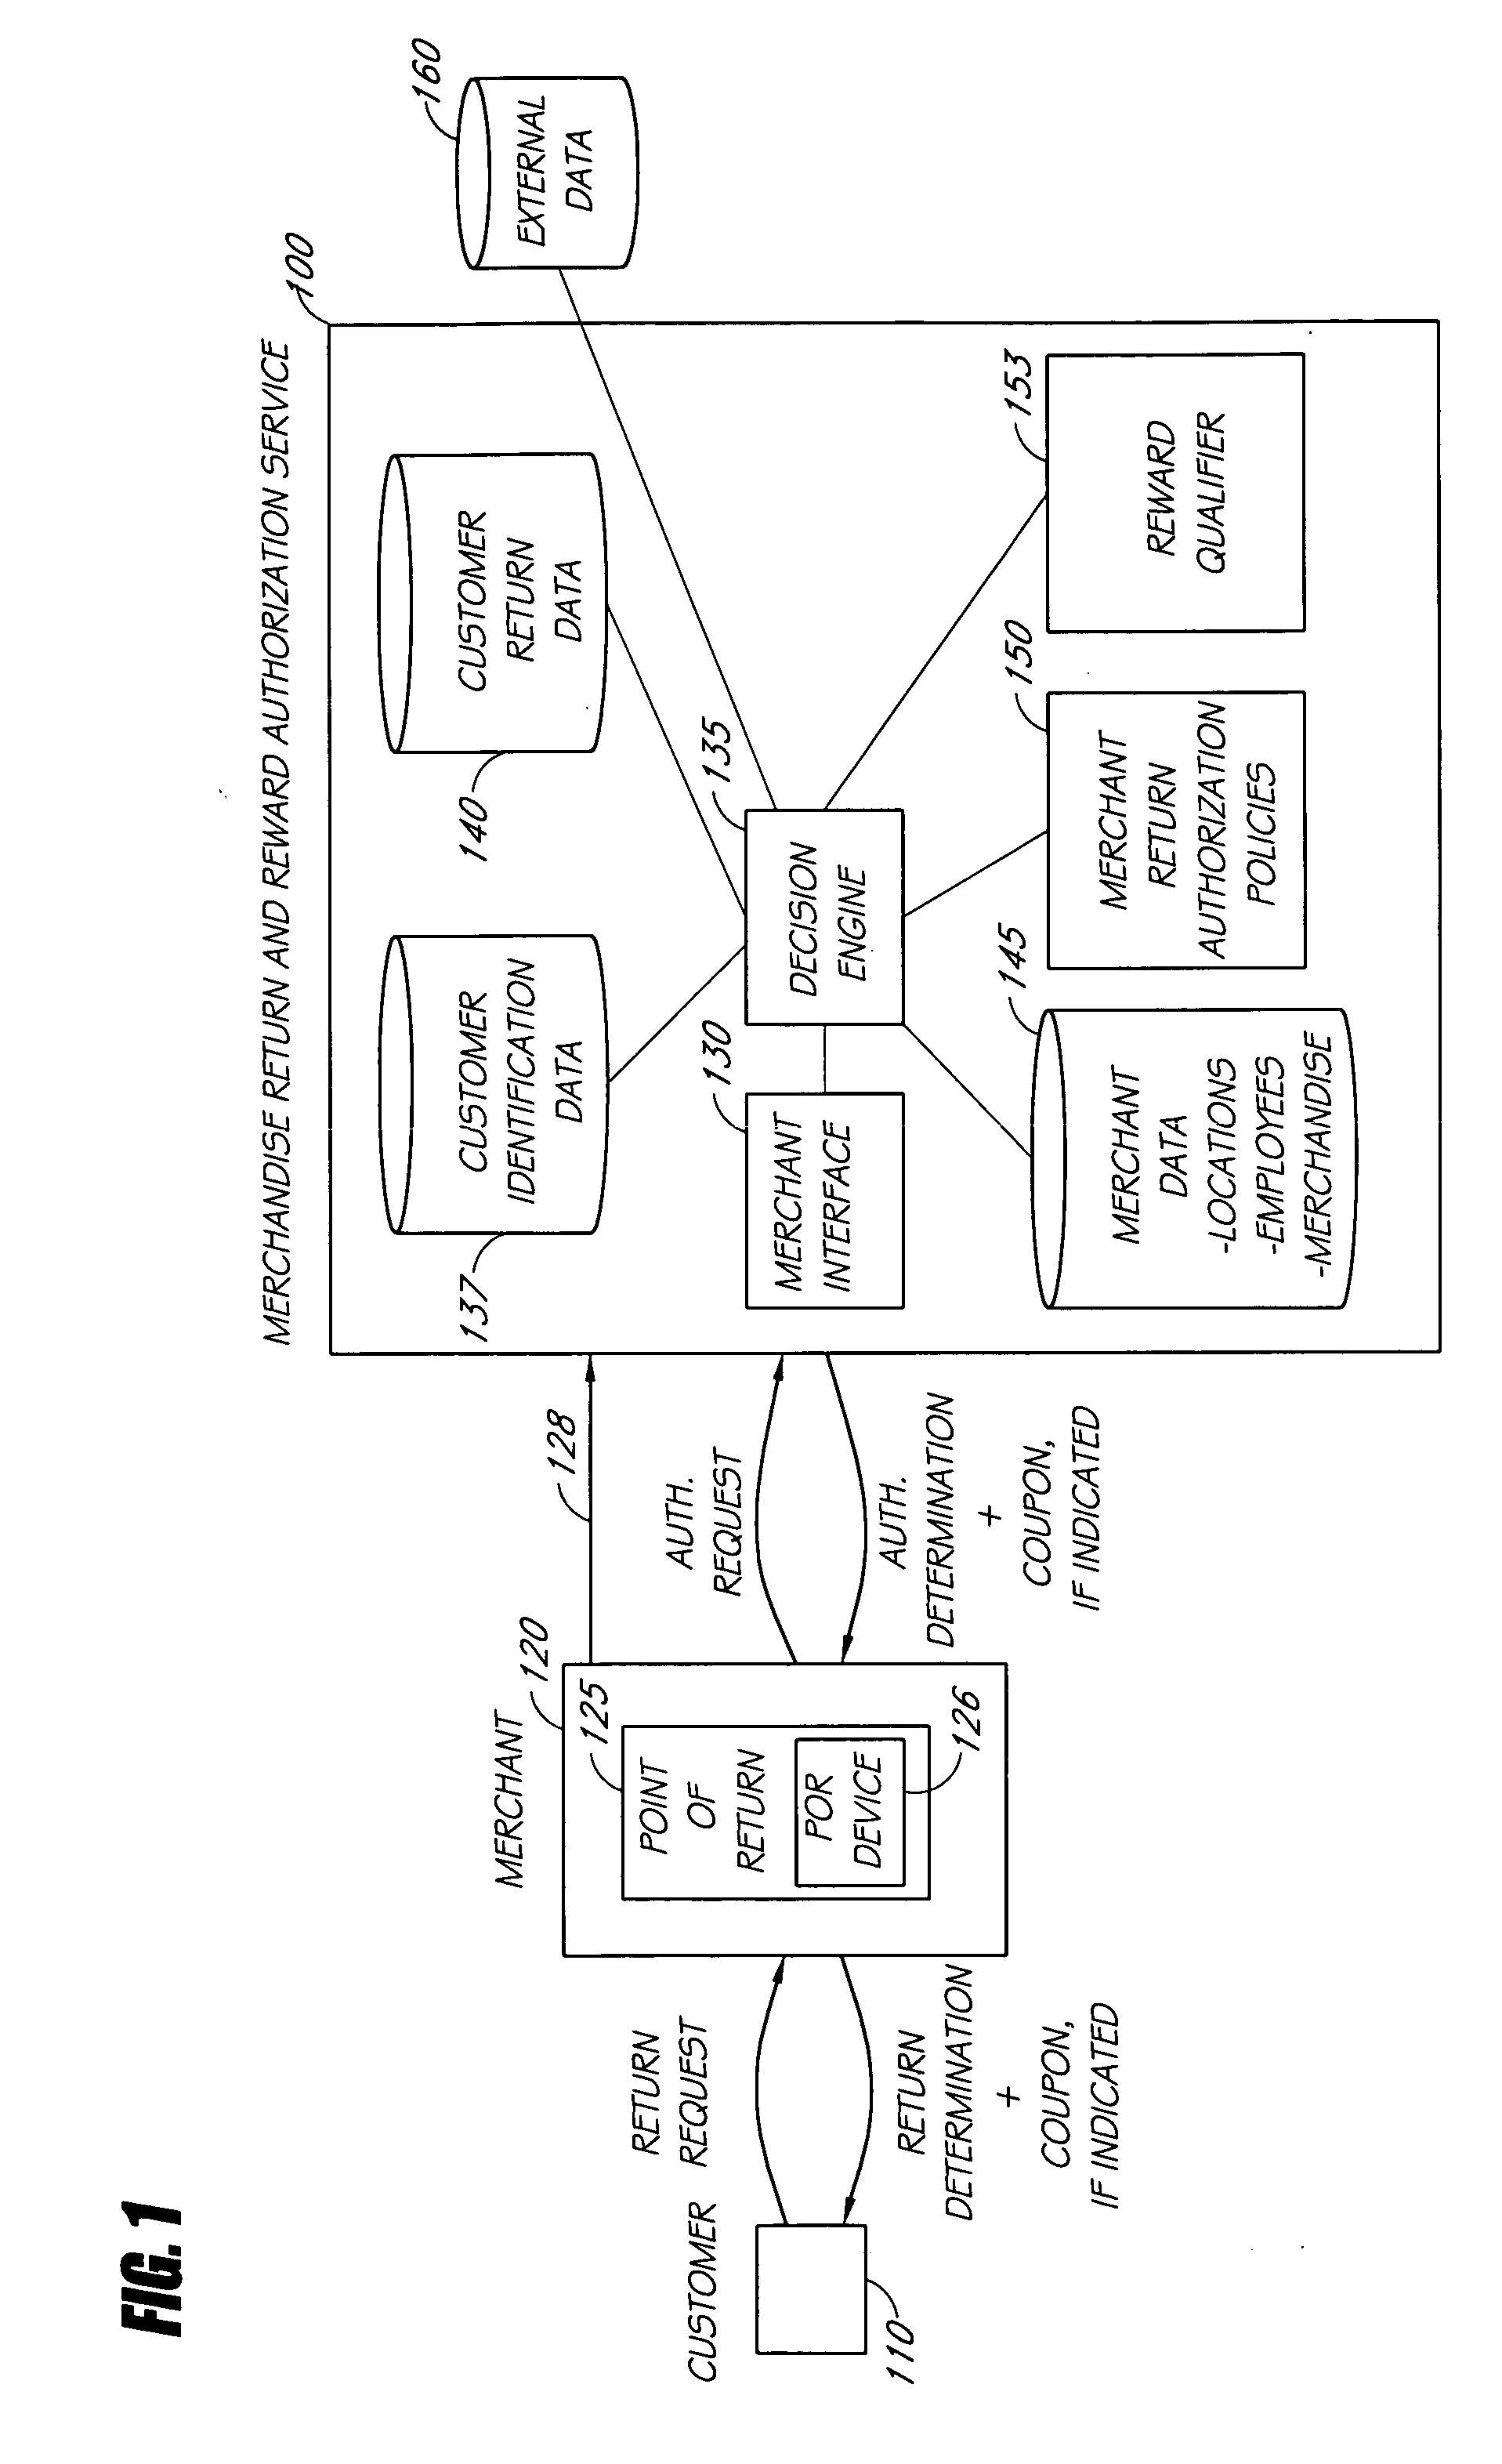 Systems and methods for determining whether to offer a reward at a point of return